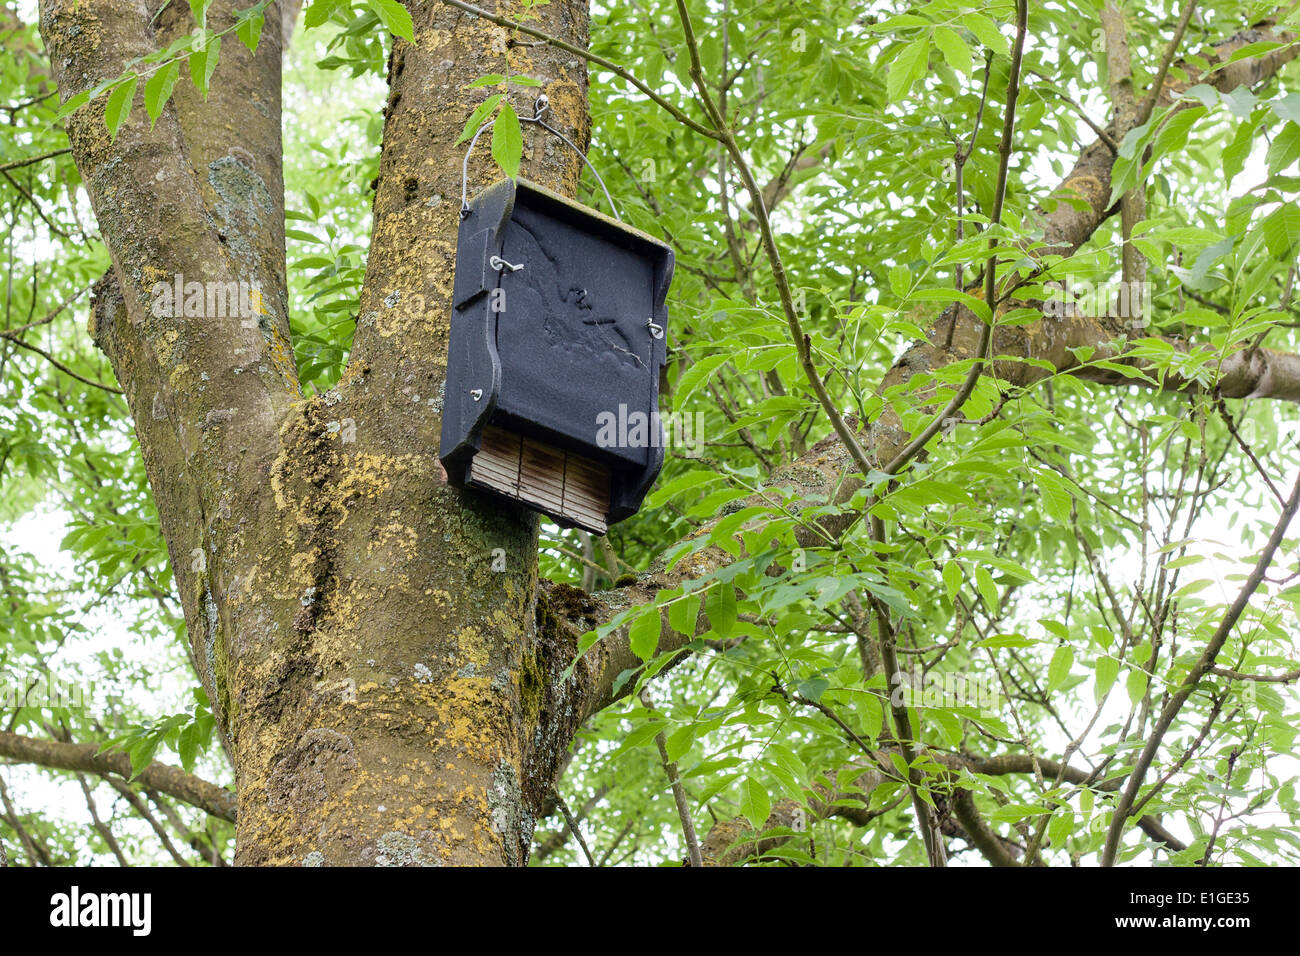 Bat box near modern housing development, note landing board at bottom, self cleaning as dropping fall to ground. Stock Photo